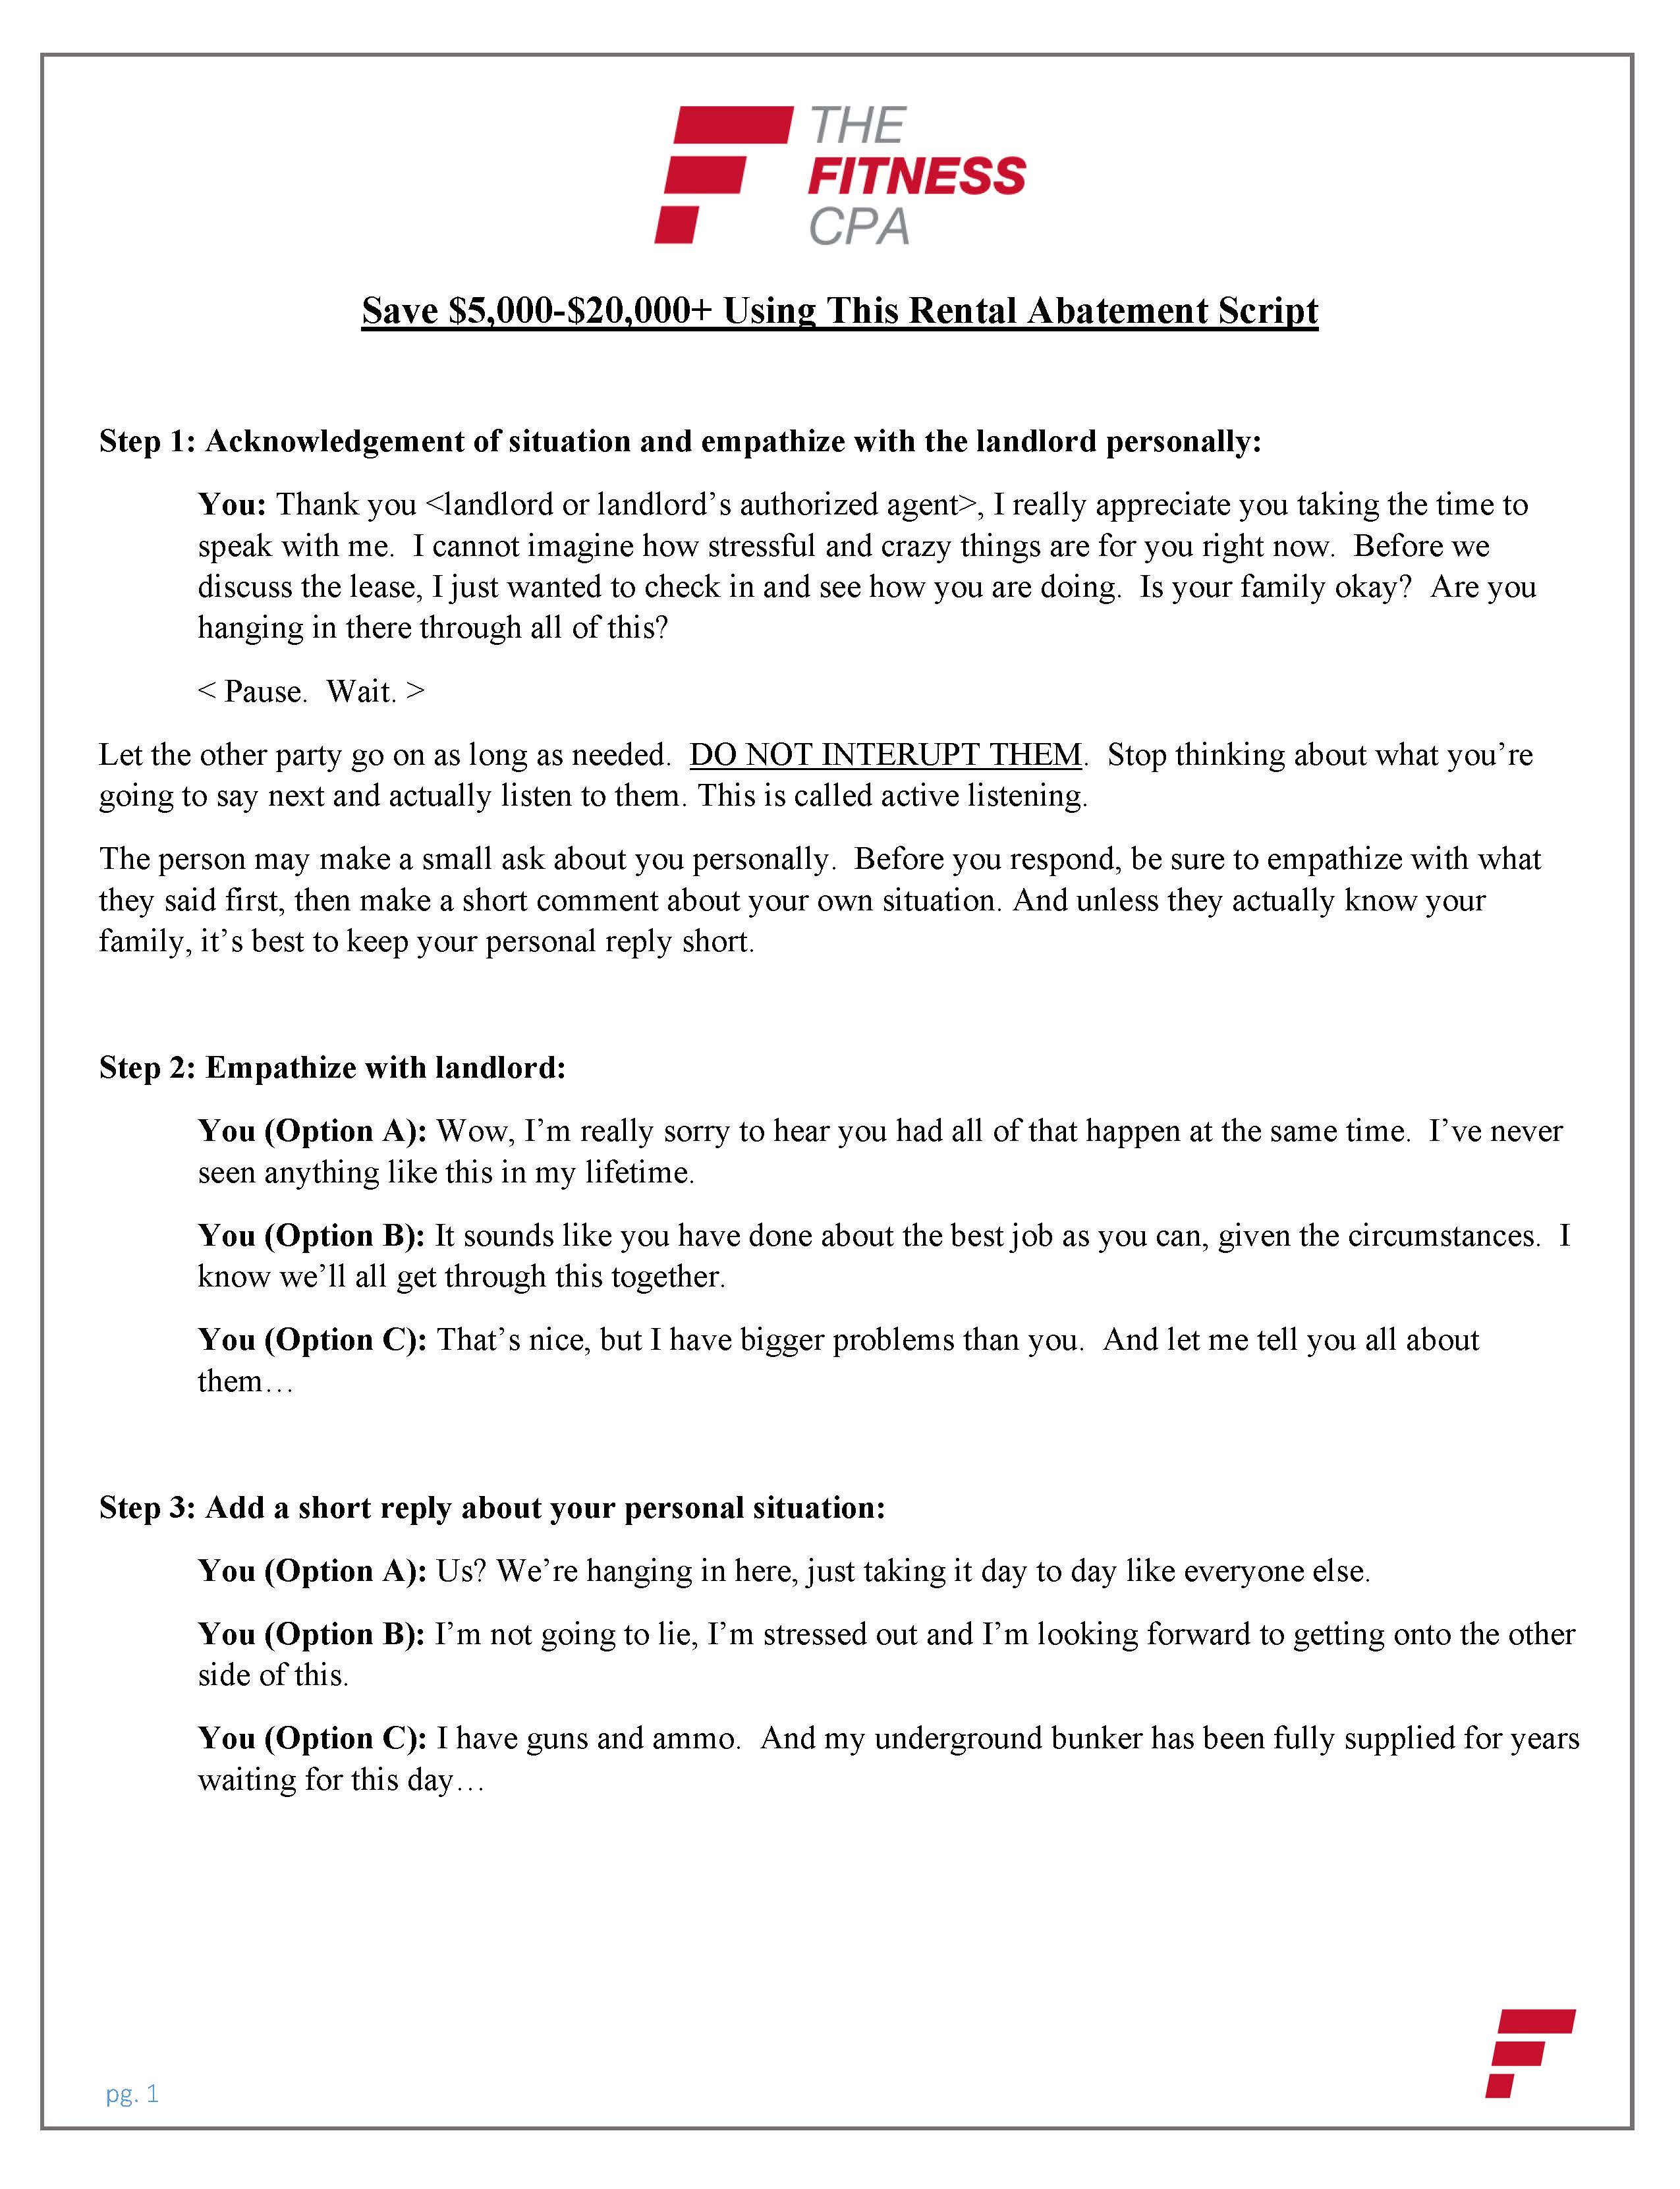 The Fitness CPA Rent Abatement Script_Page_1